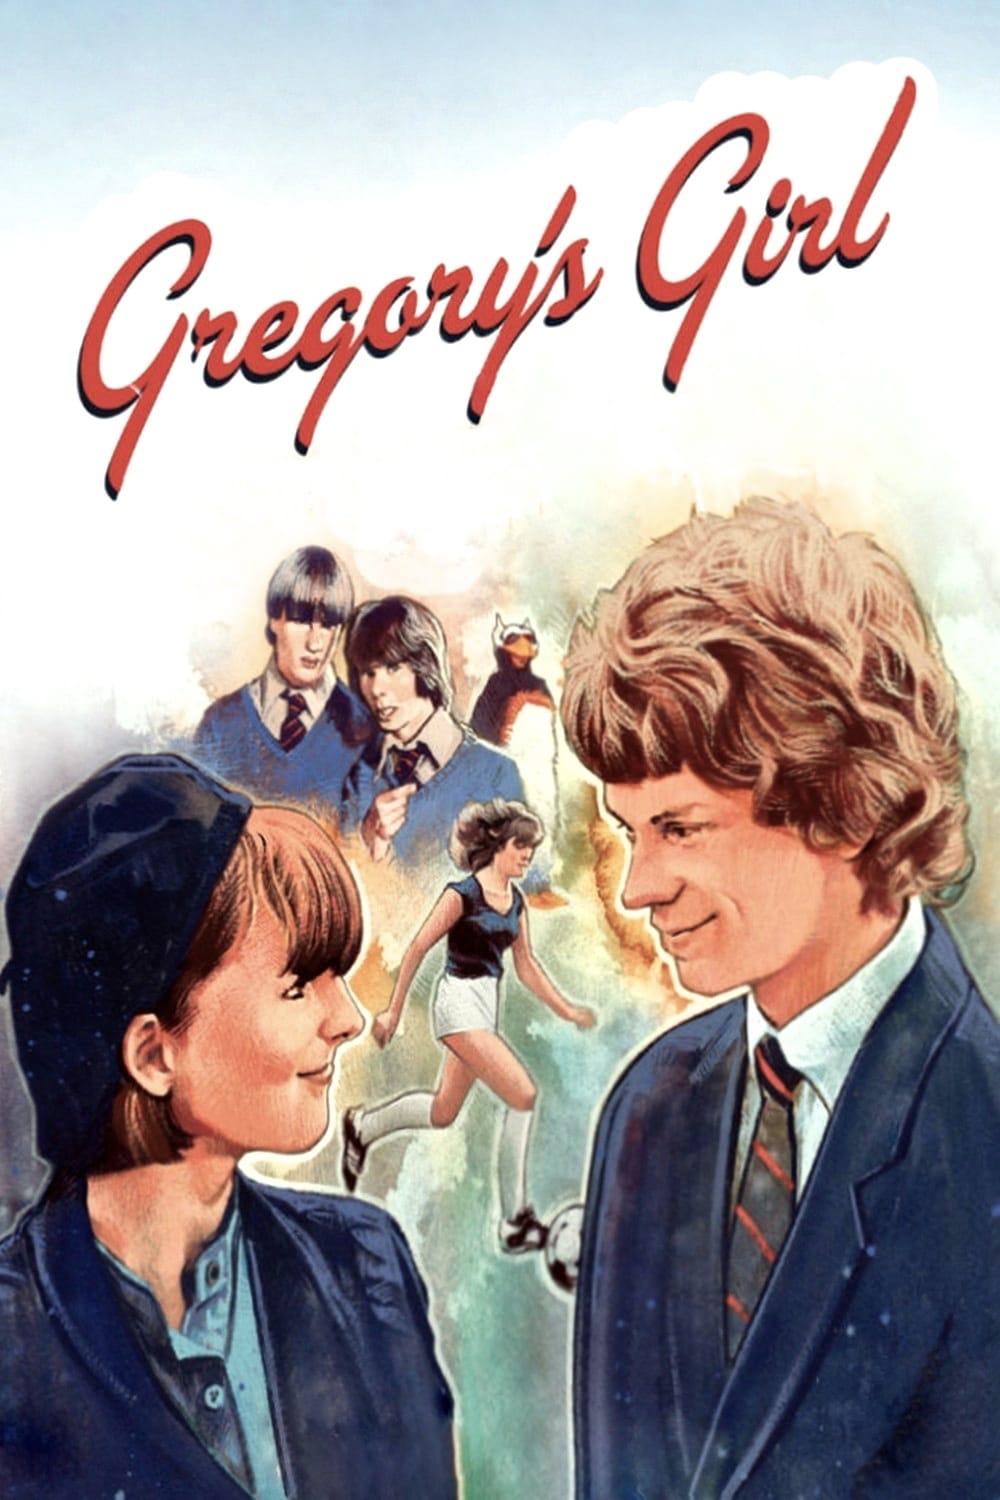 Gregory's Girl poster